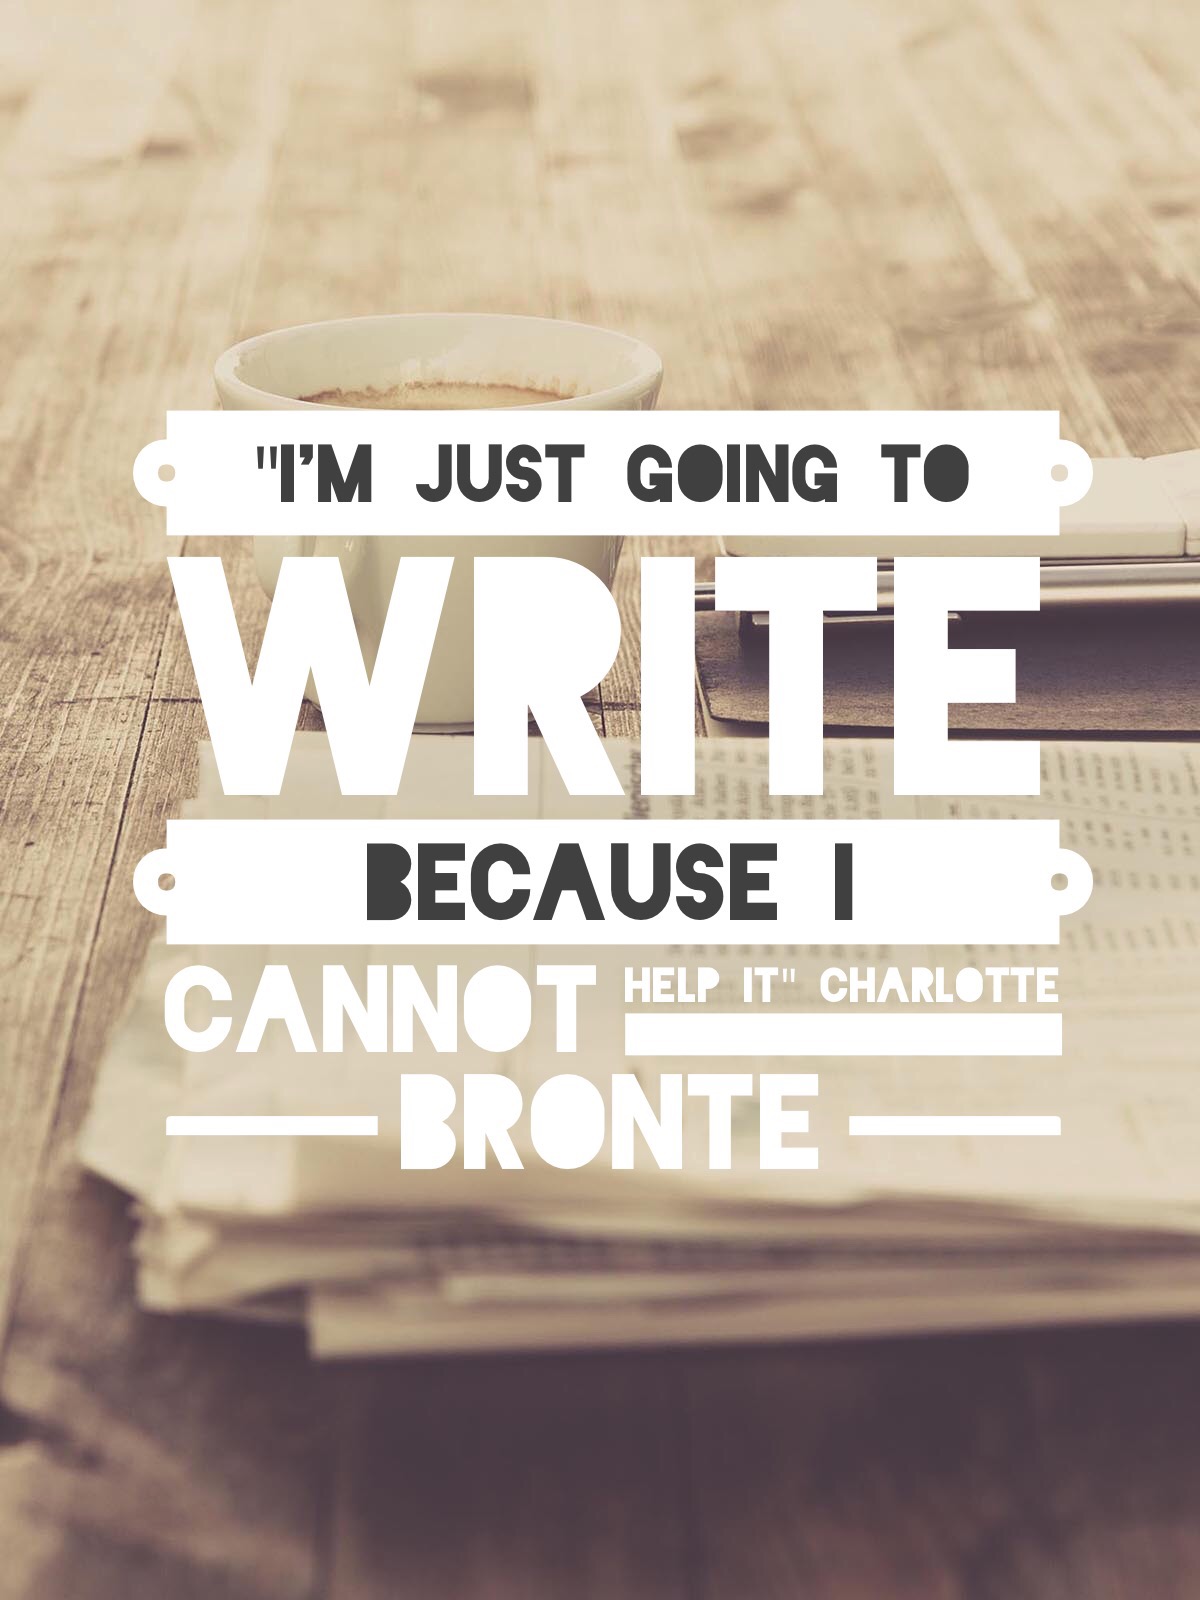 Literary Quotes For Teachers Charlotte Bronte "I'm just going to write"